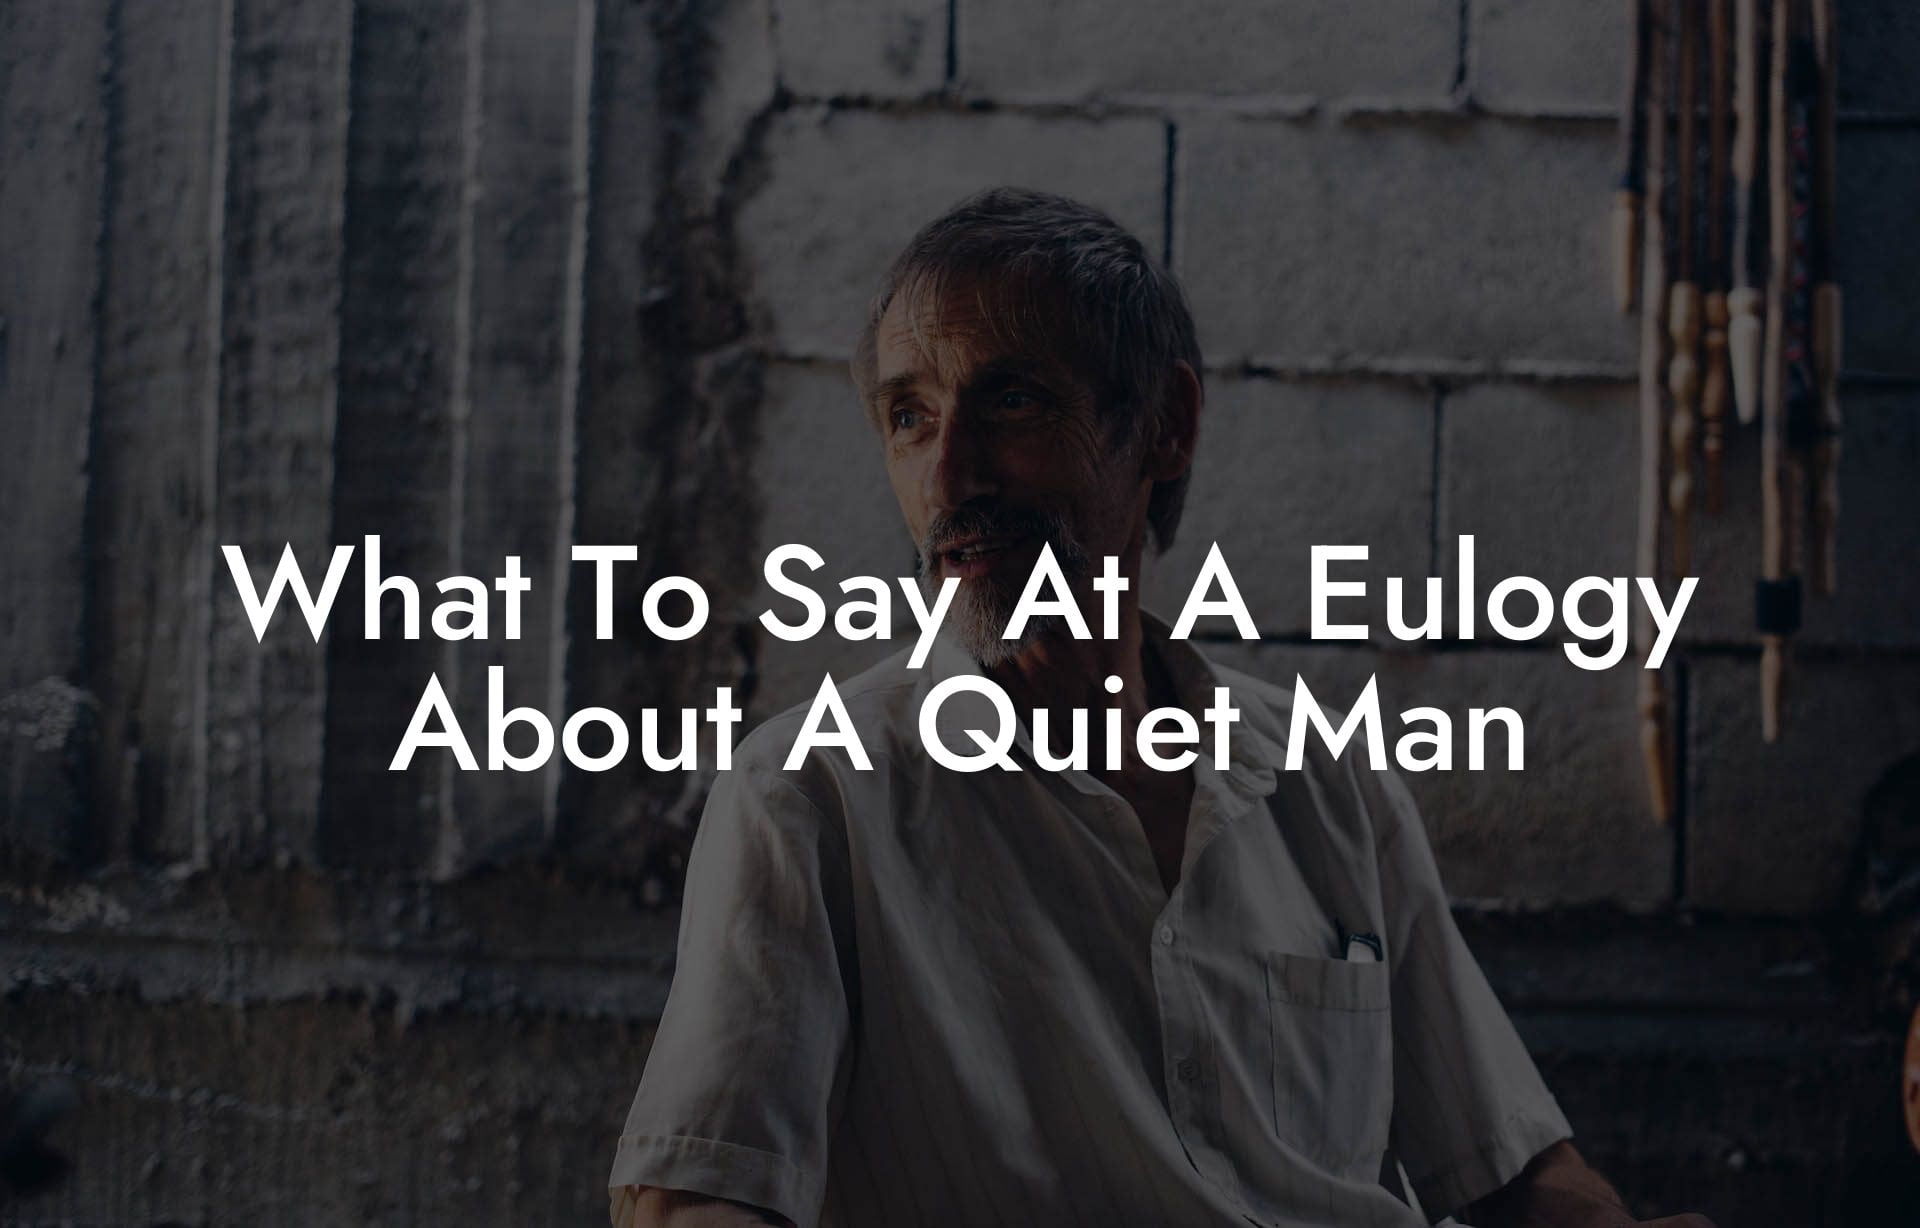 What To Say At A Eulogy About A Quiet Man